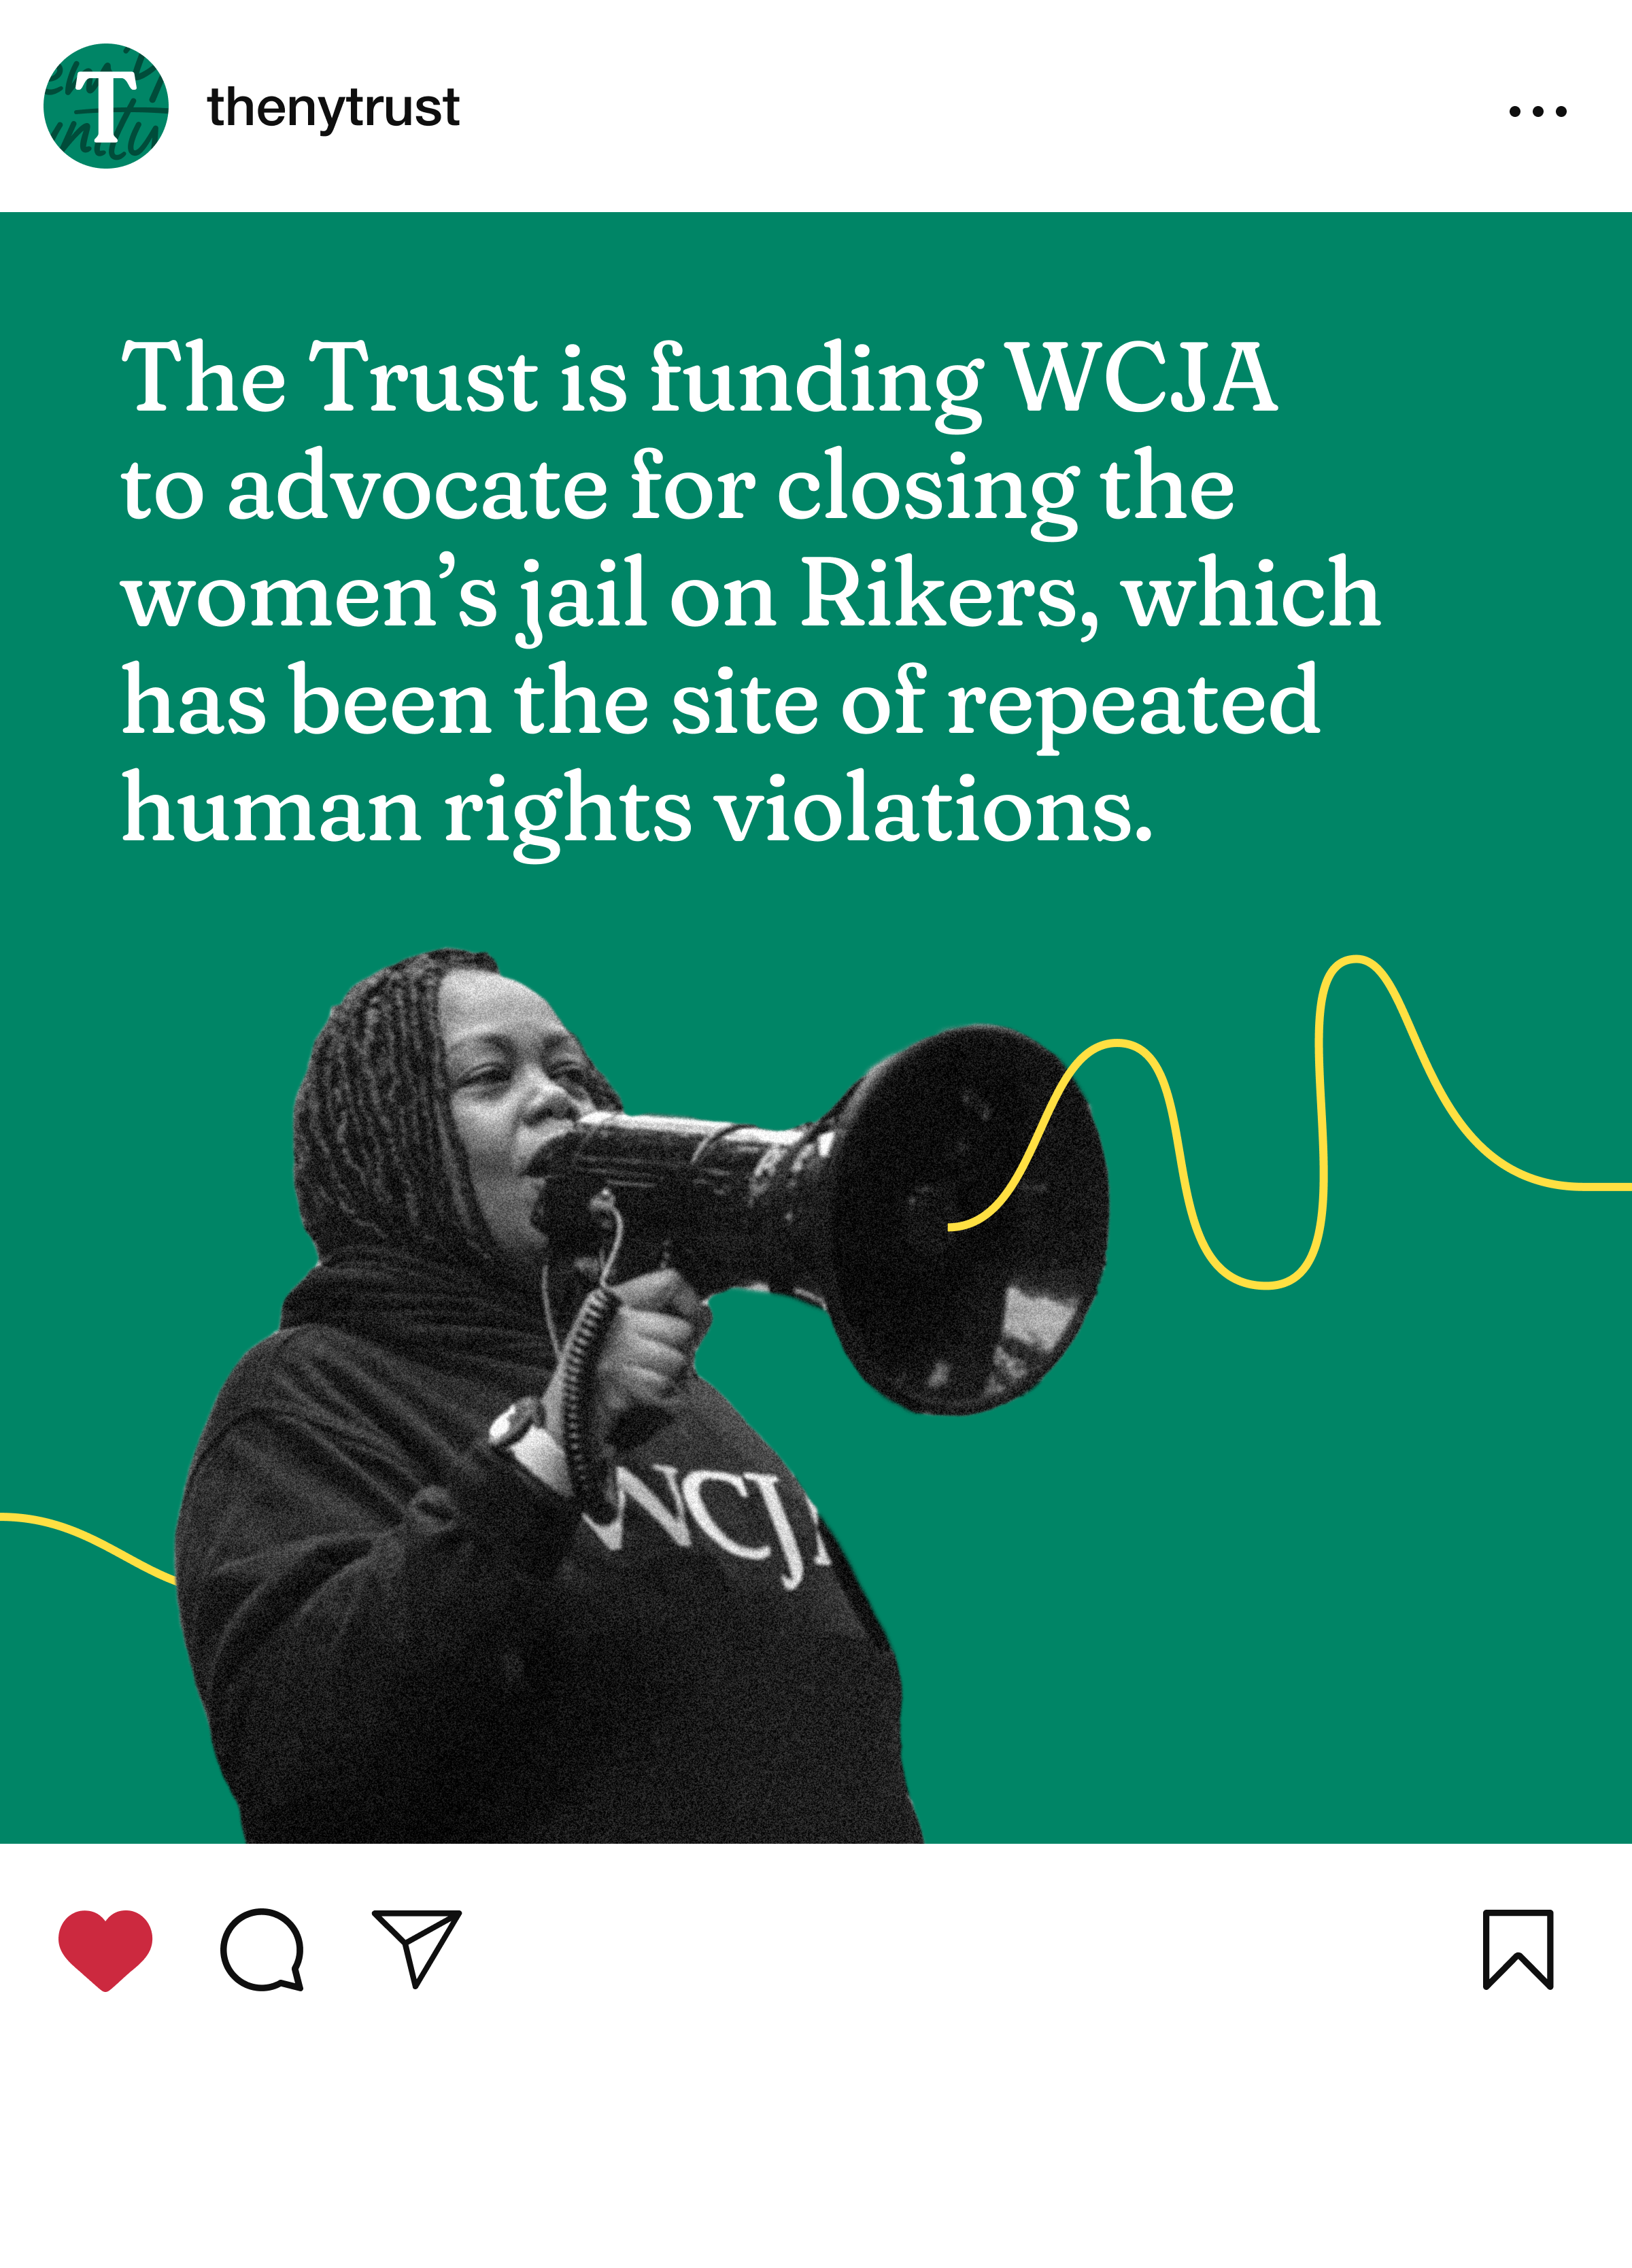 An Instagram post by @thenytrust featuring a woman holding a megaphone. The text reads: "The Trust is funding WCJA to advocate for closing the women’s jail on Rikers, which has been the site of repeated human rights violations.